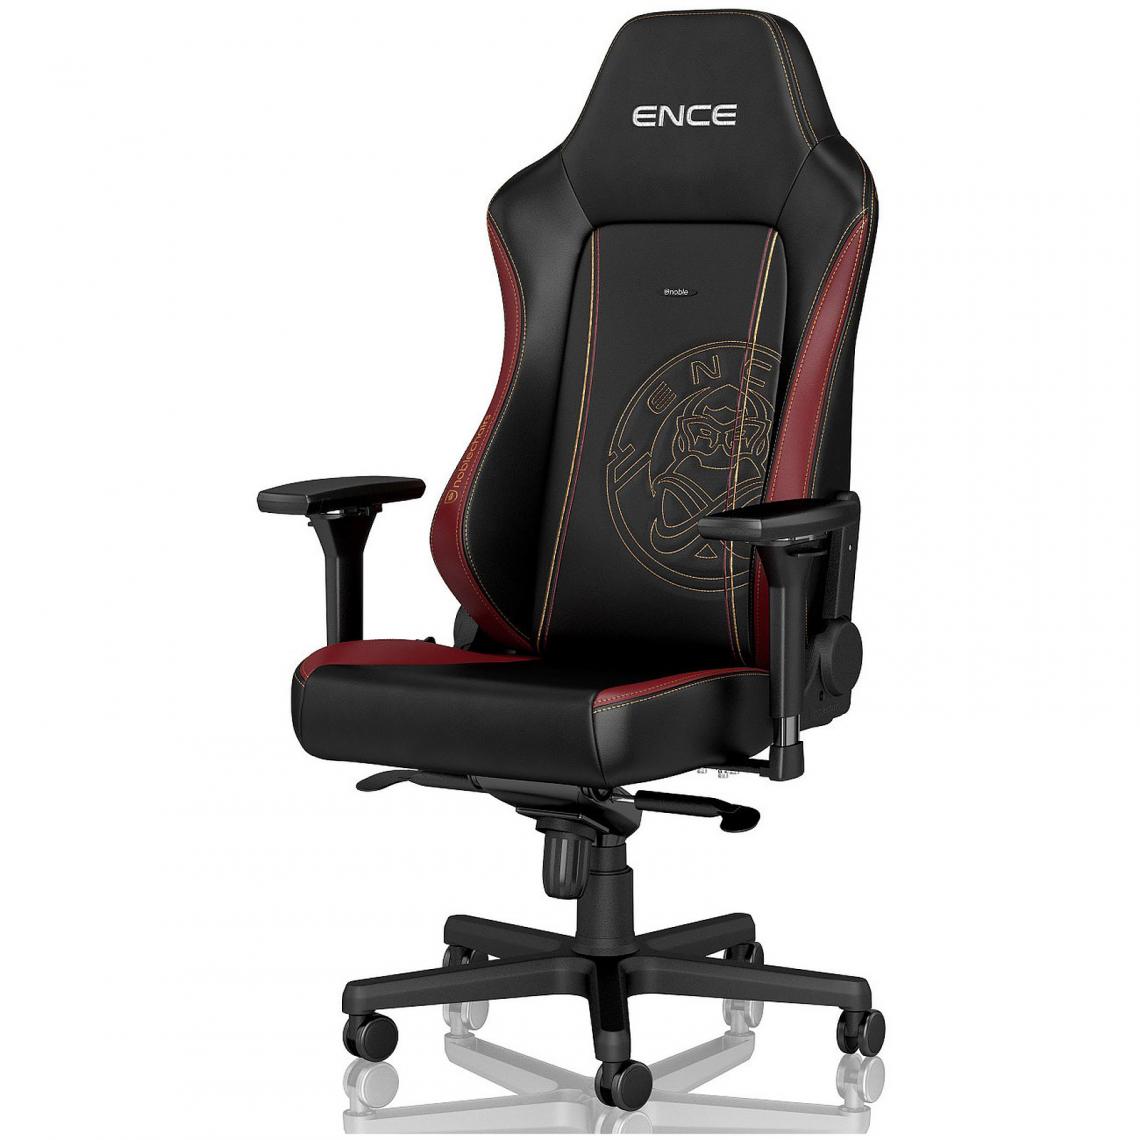 Noblechairs - Fauteuil Gamer Hero Ence Edition (Noir) - Chaise gamer